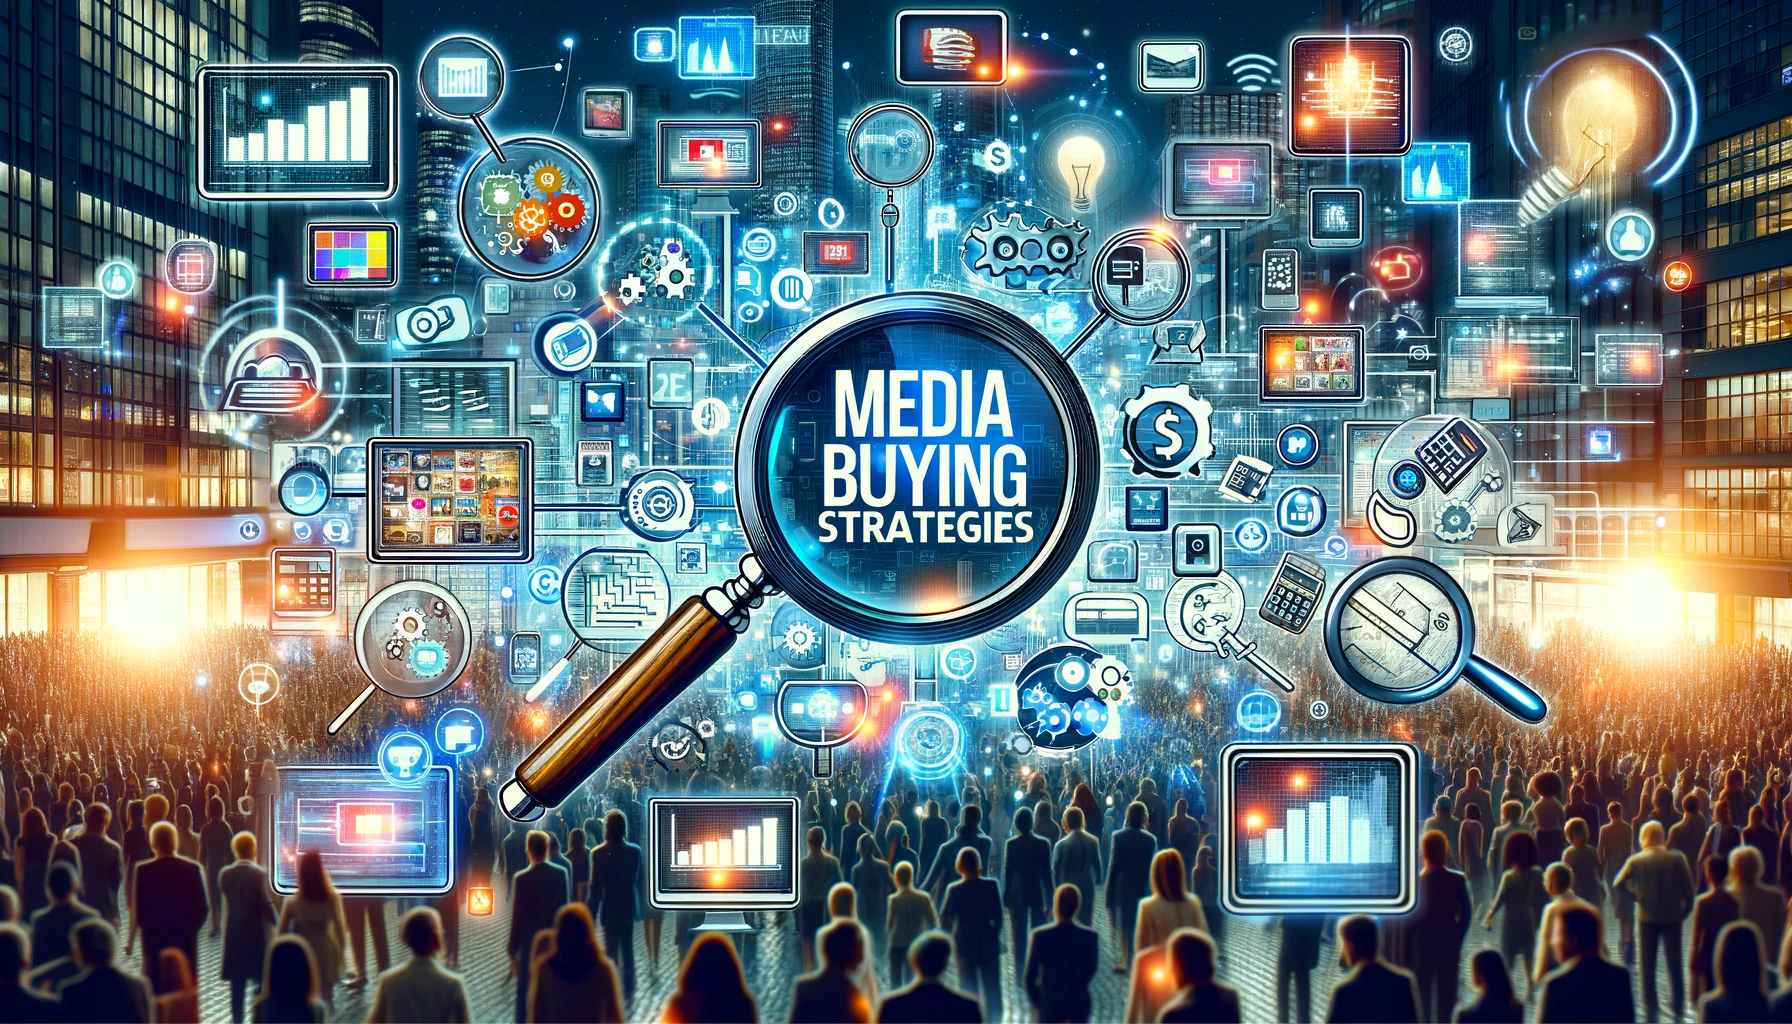 A bustling digital marketplace filled with screens and billboards displaying ads, surrounded by symbols like magnifying glasses, calculators, and charts representing the 'Media Buying Strategies' of analysis, negotiation, and planning.